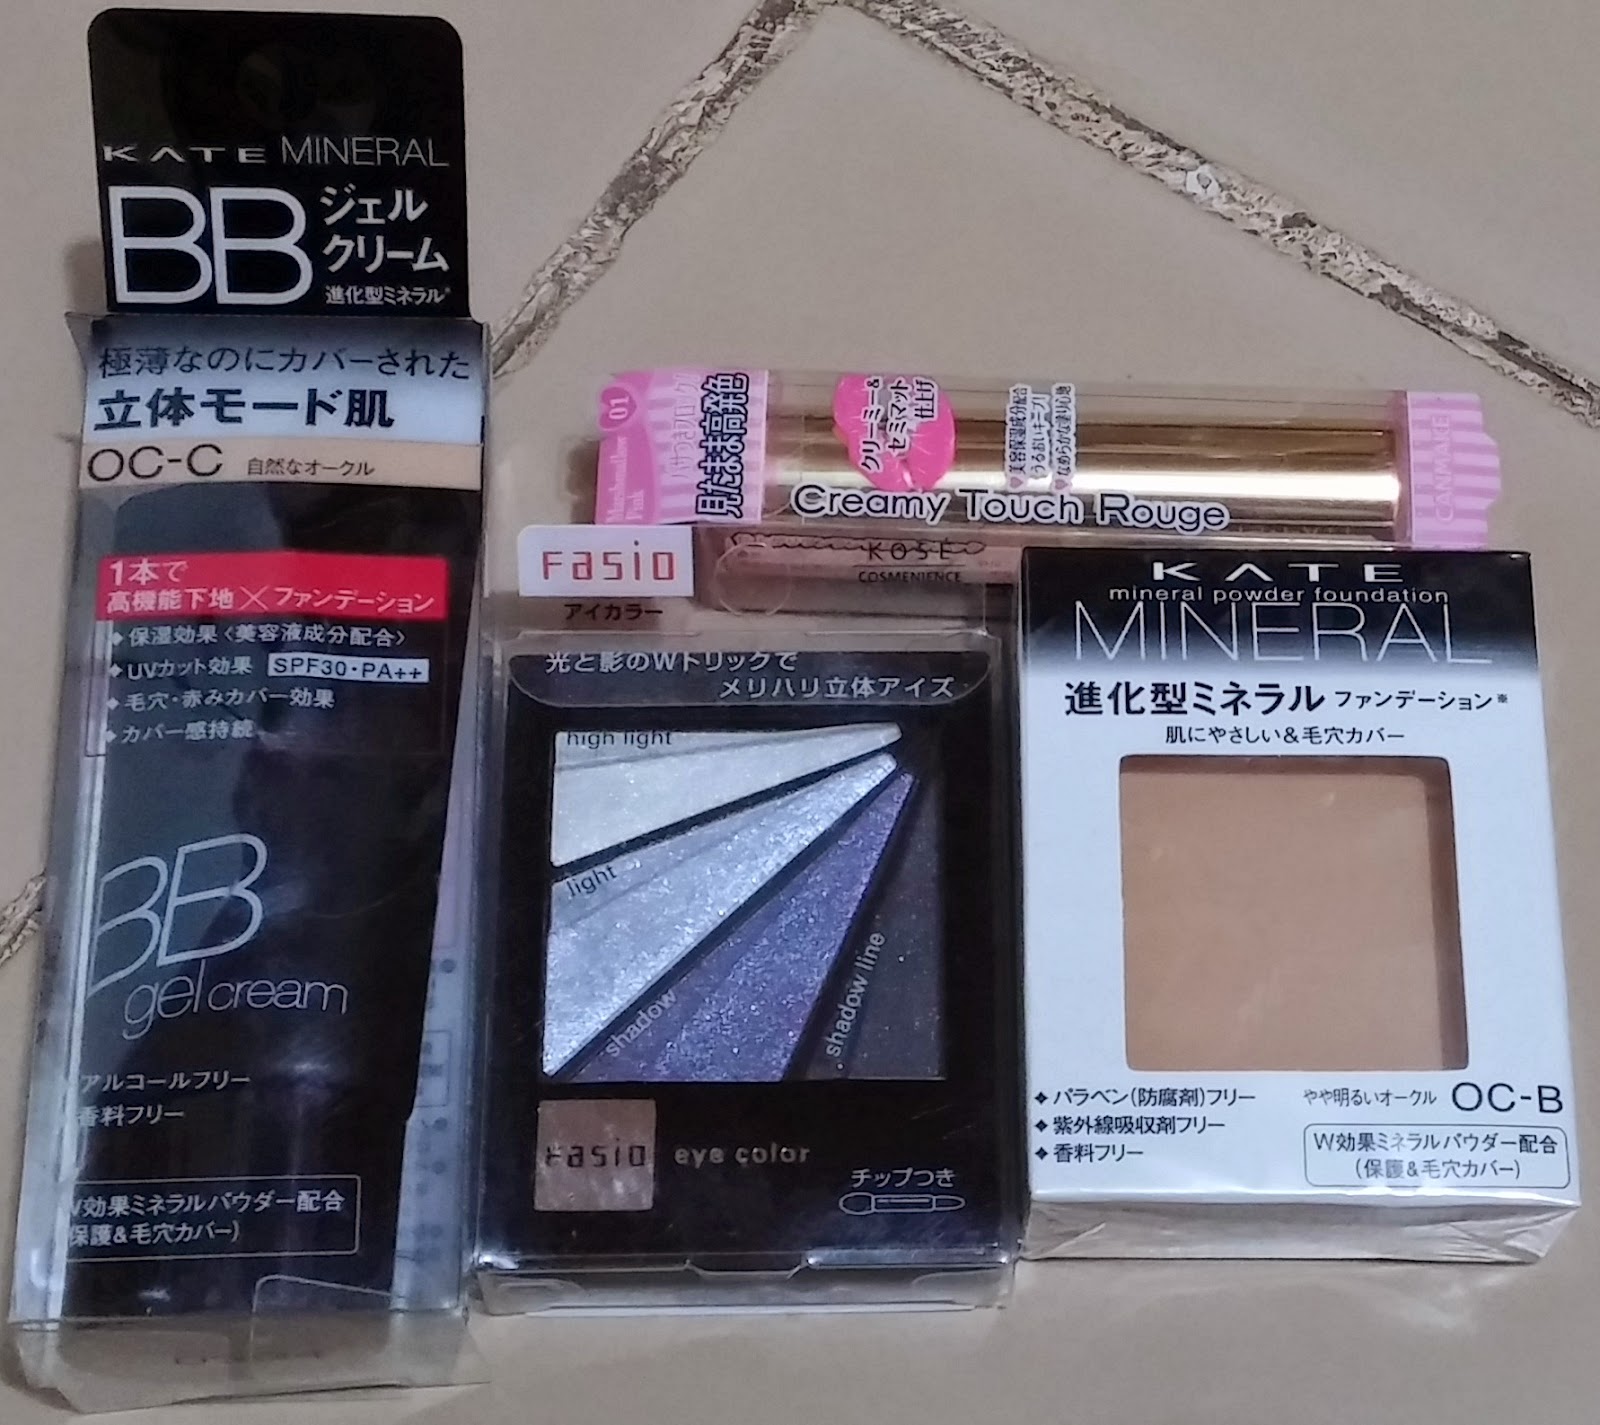 jage overgive Klappe Japan Makeup Brands From Thailand - WateryScenery